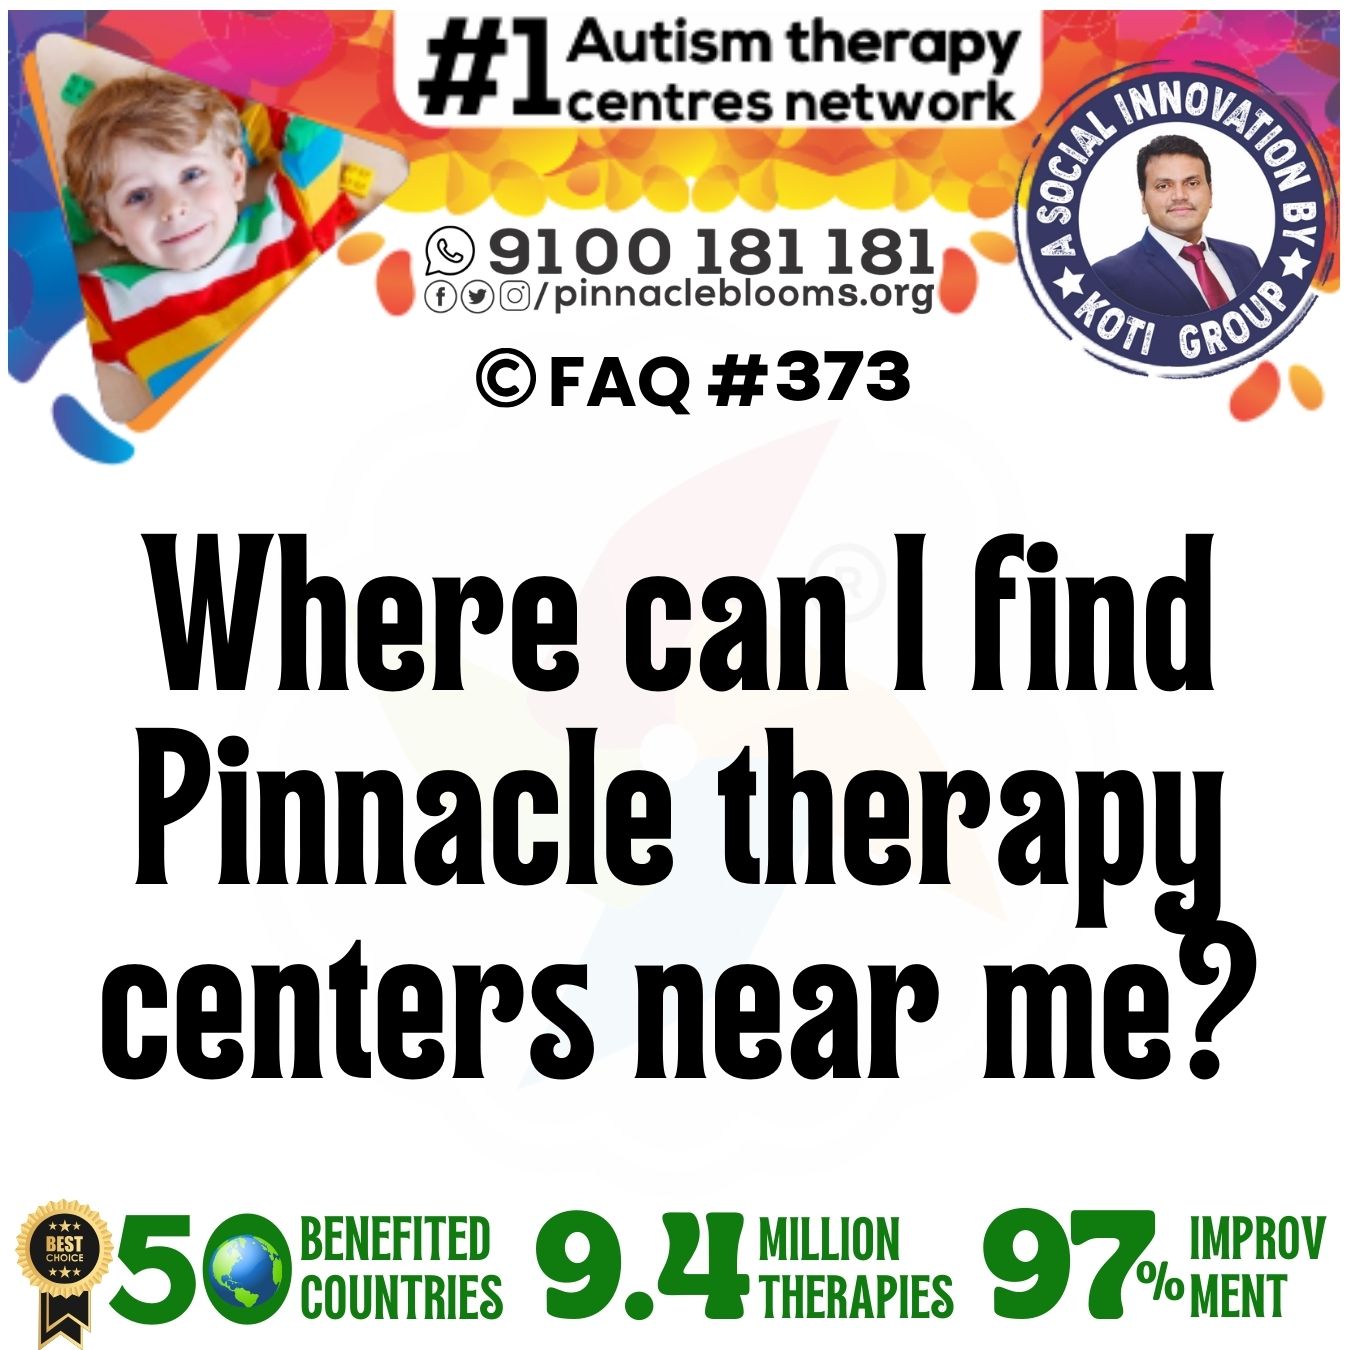 Where can I find Pinnacle therapy centers near me?